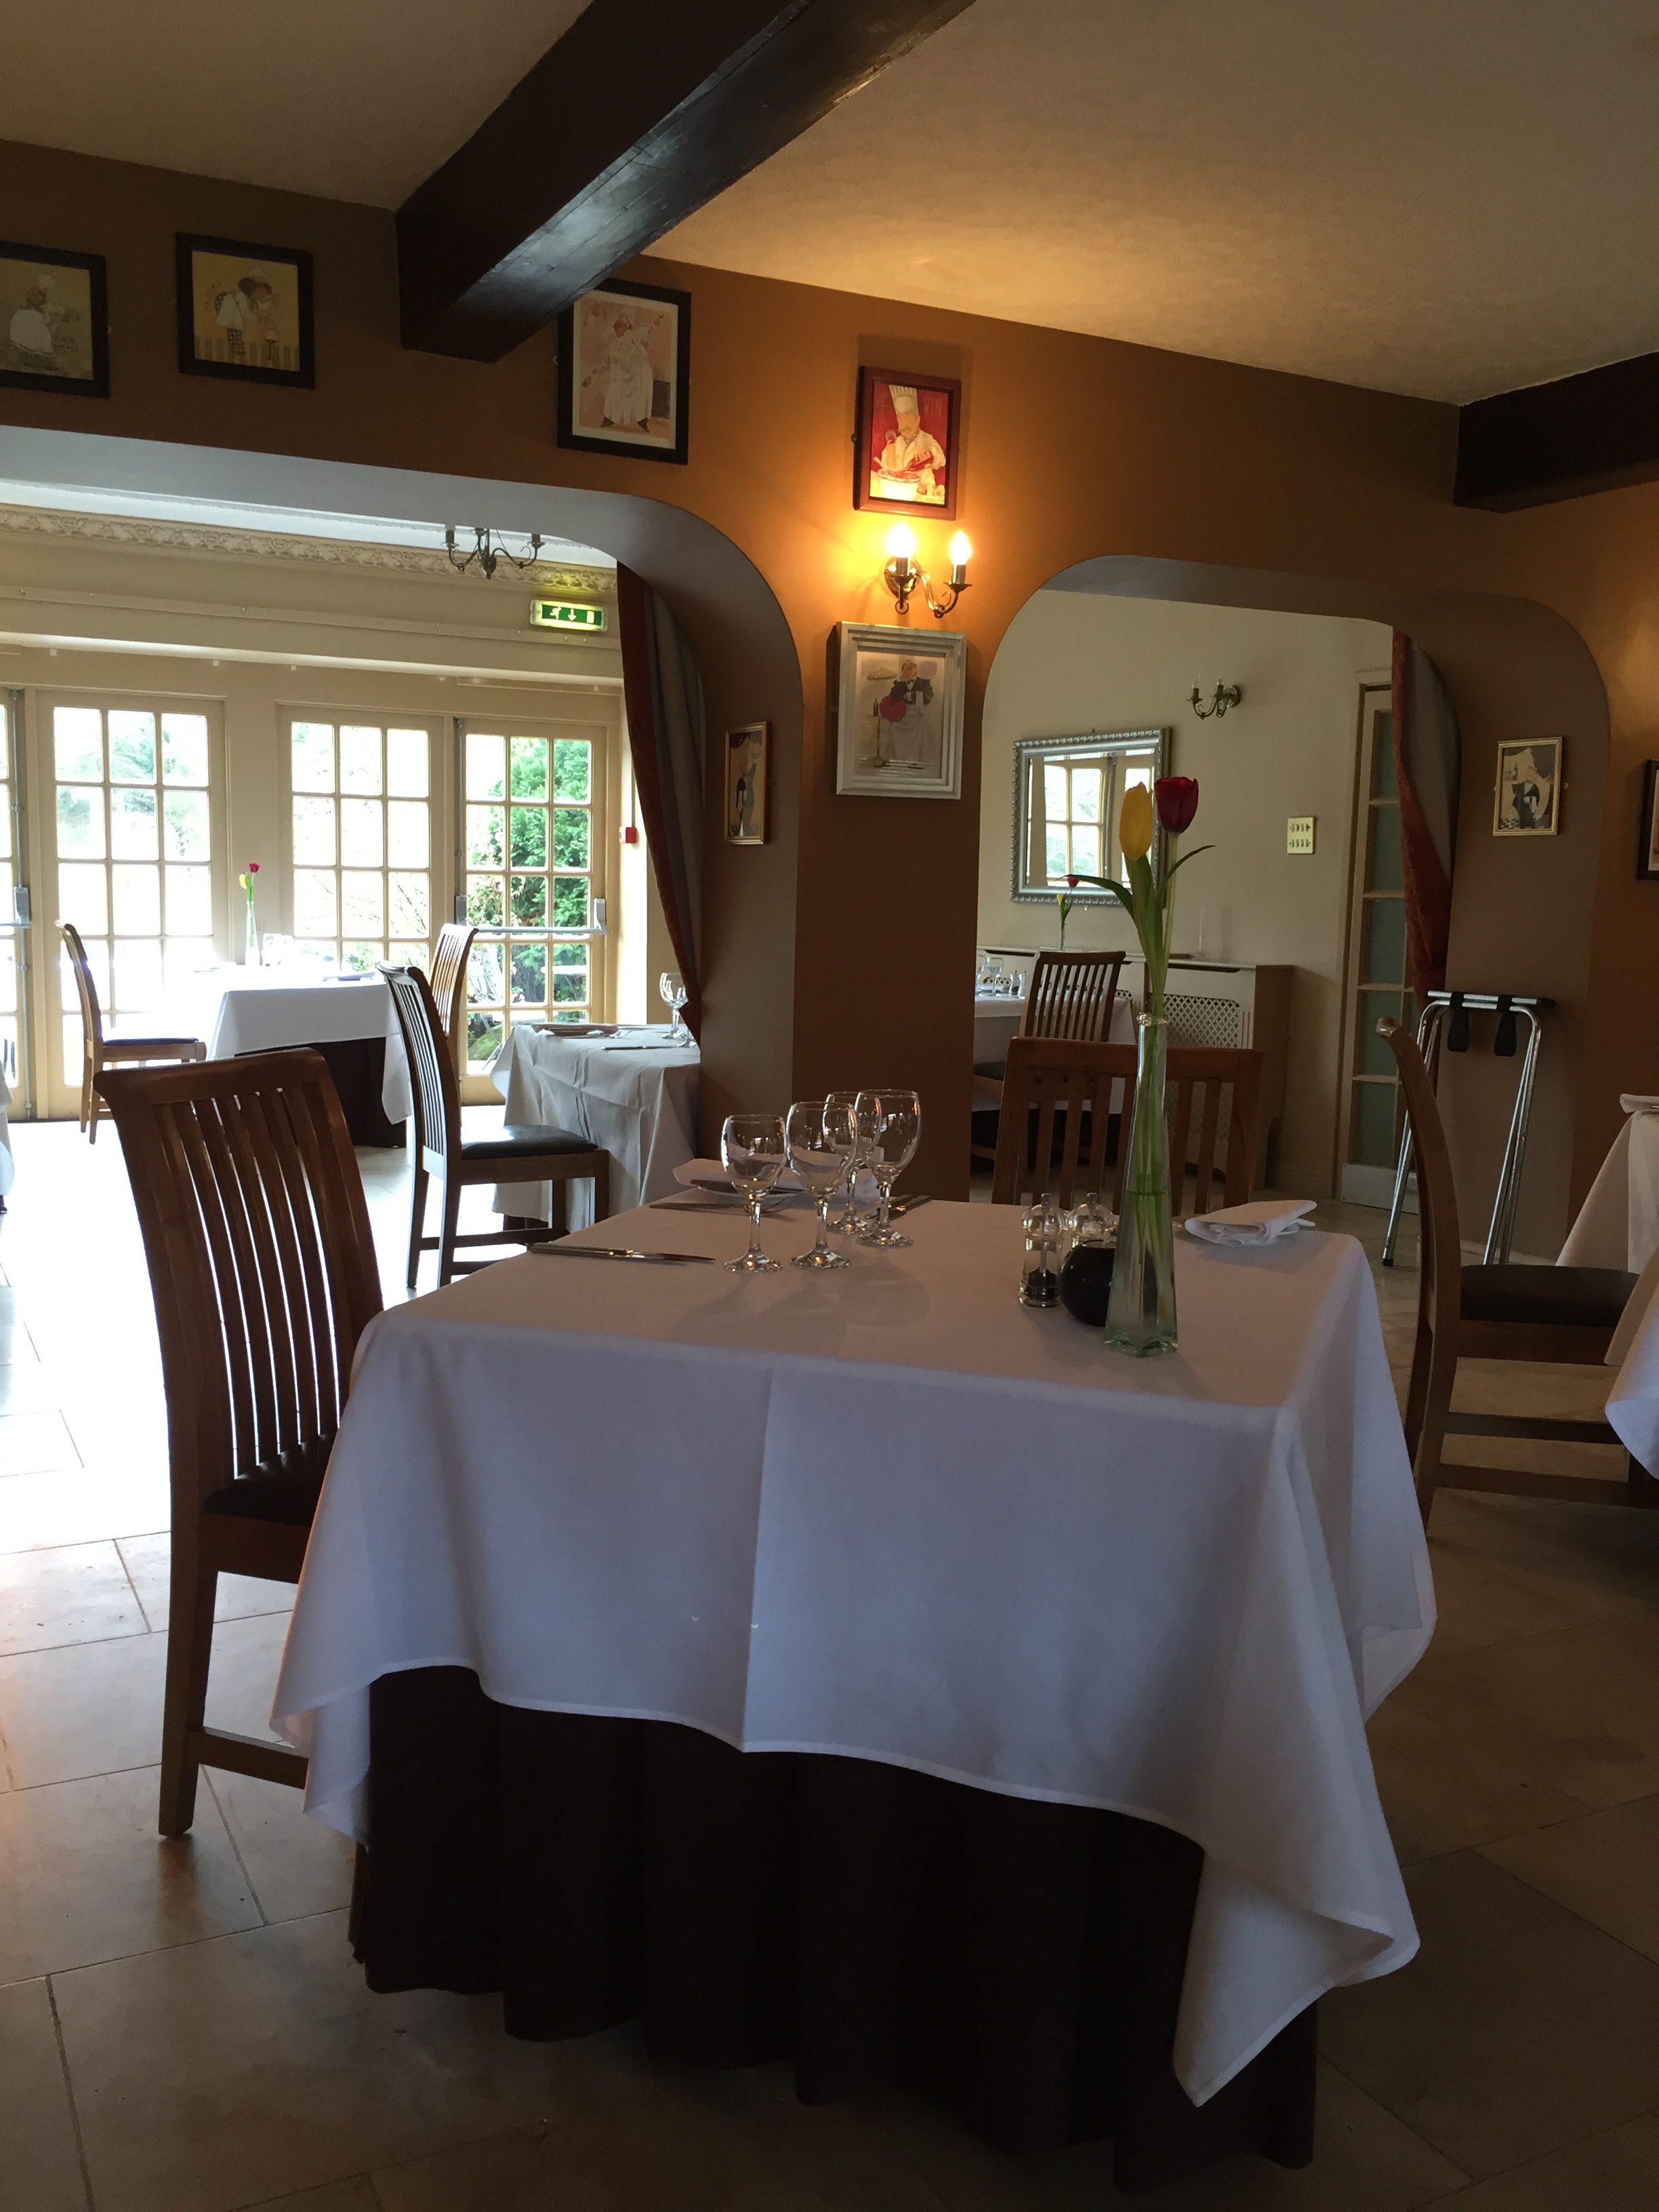 The courtyard restaurant at Ox Pasture Hall, Scarborough